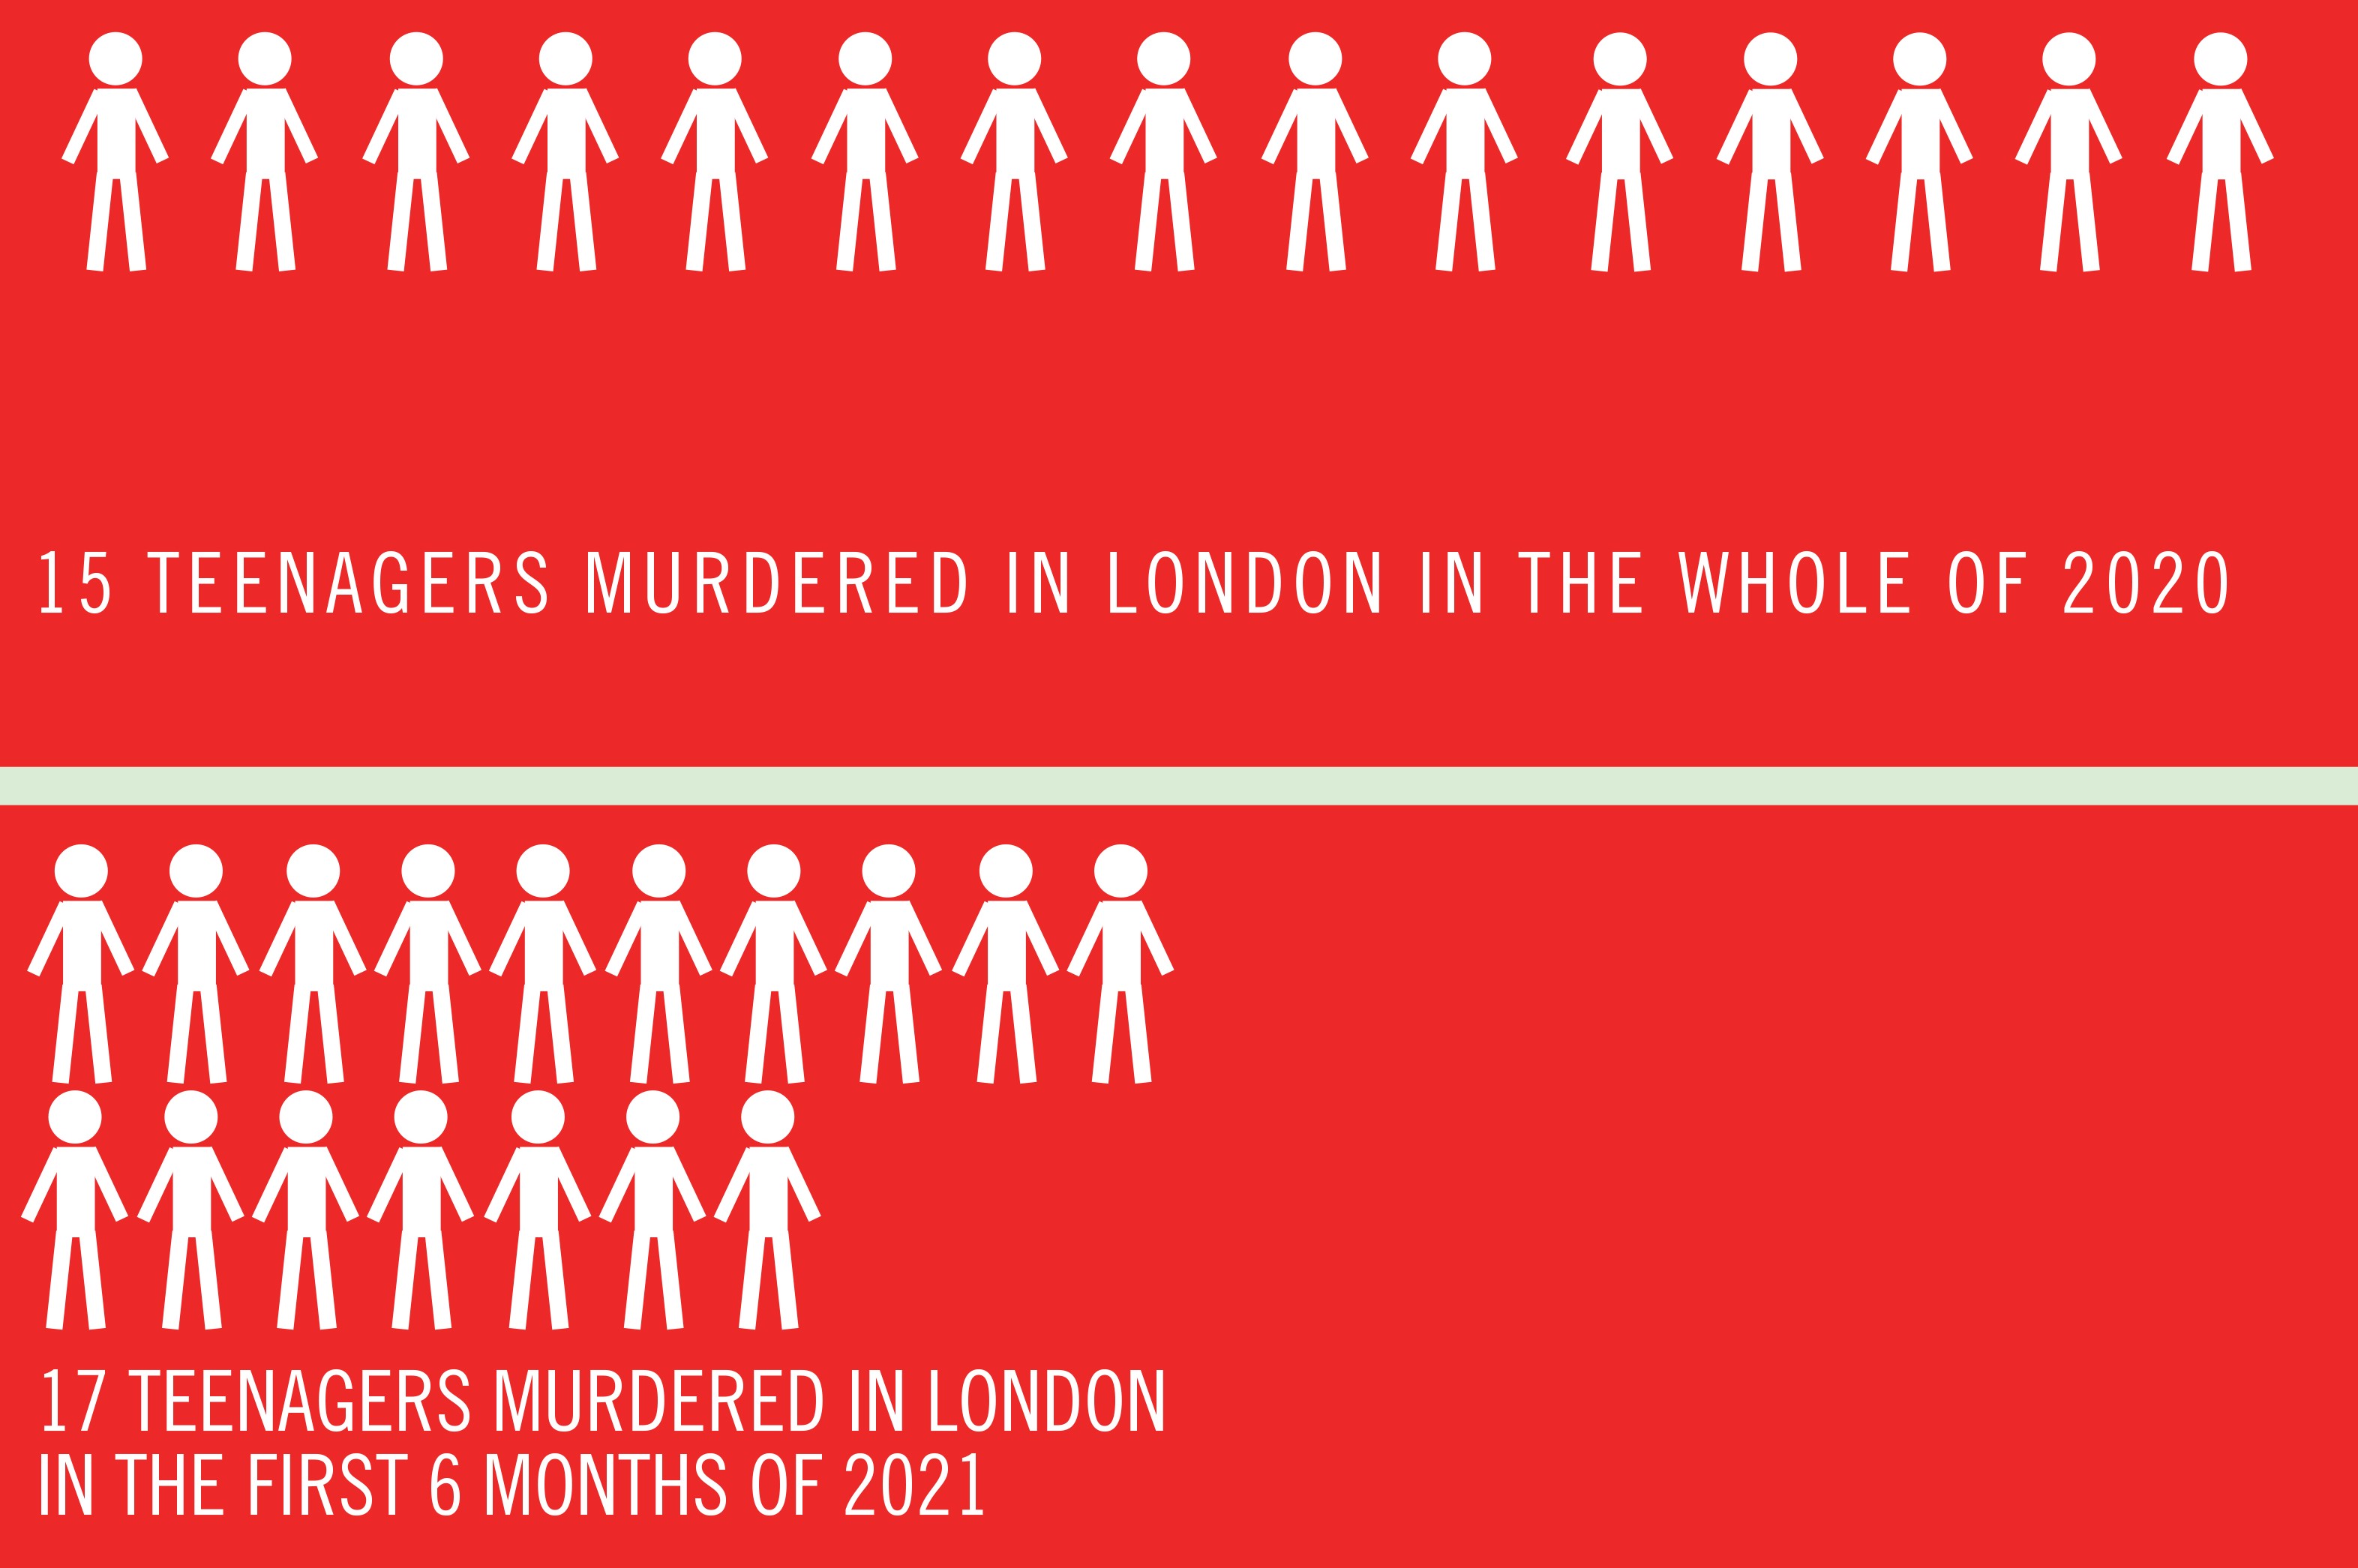 15 Teenagers murdered in London in the whole of 2020. 17 Teenagers murdered in London in the 6 months of 2021  